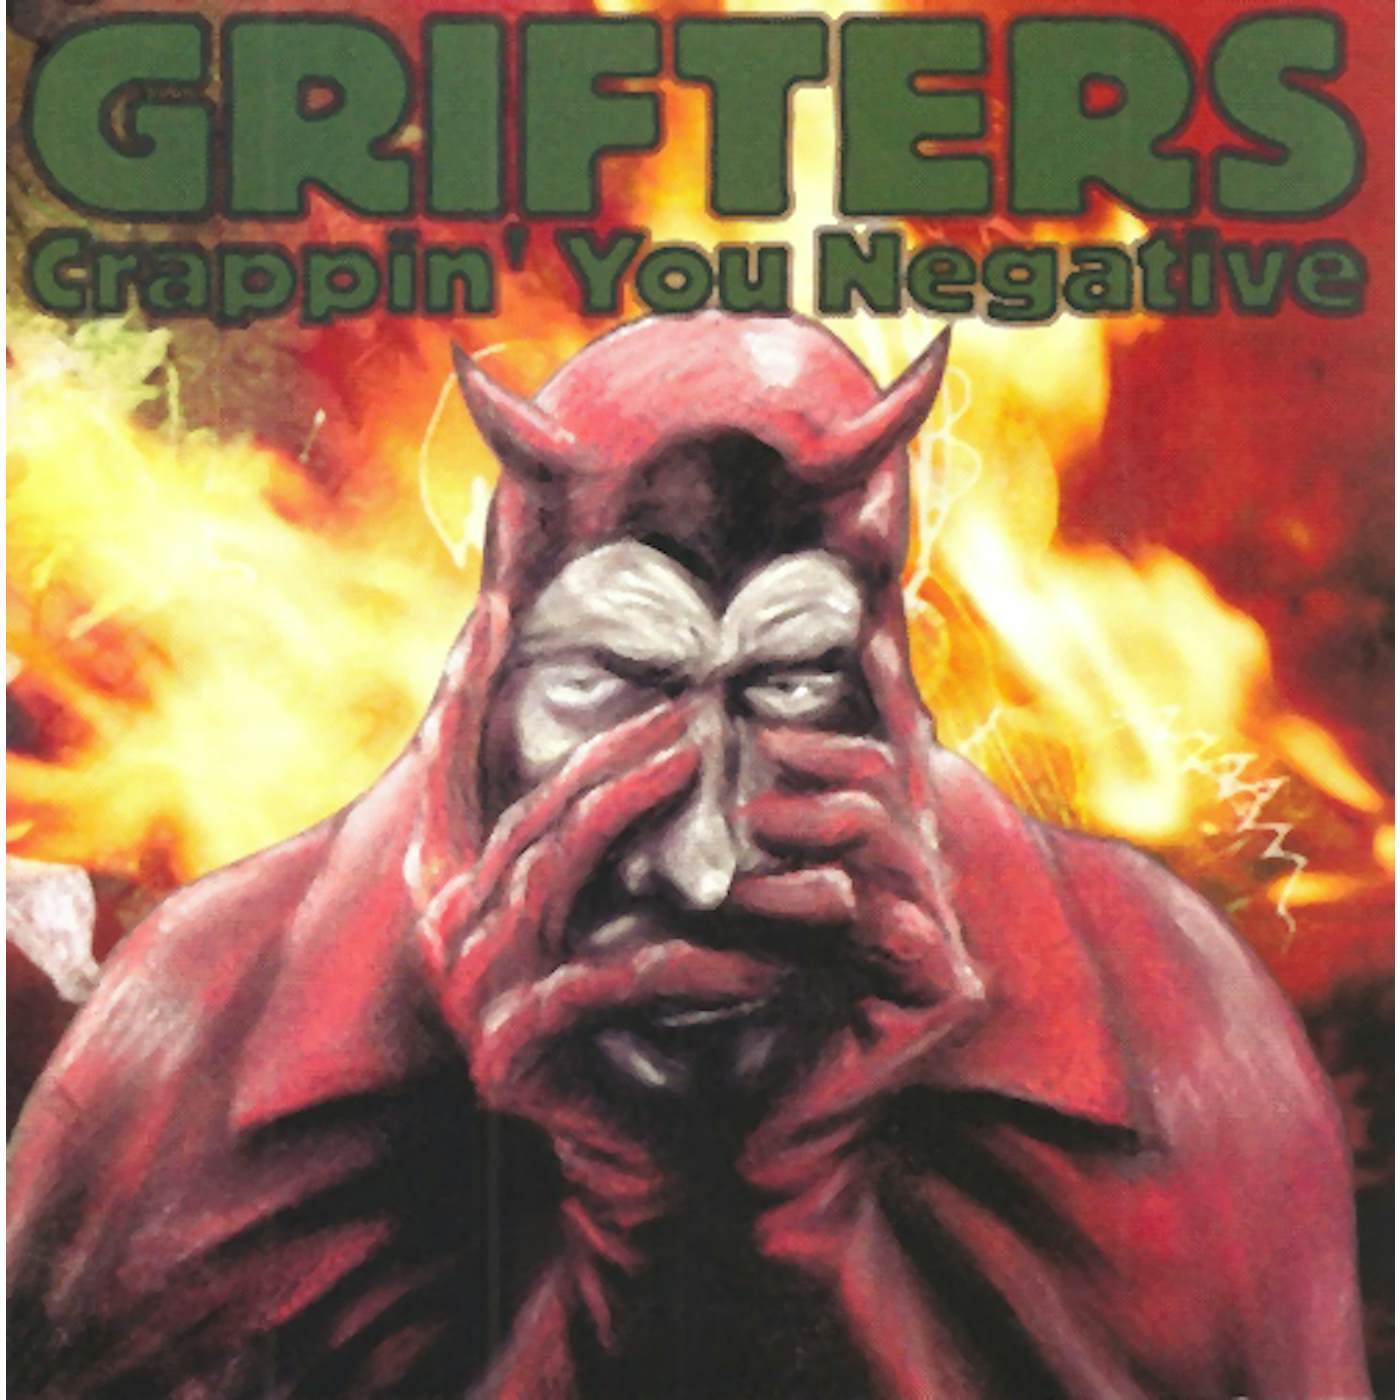 The Grifters Crappin' You Negative Vinyl Record